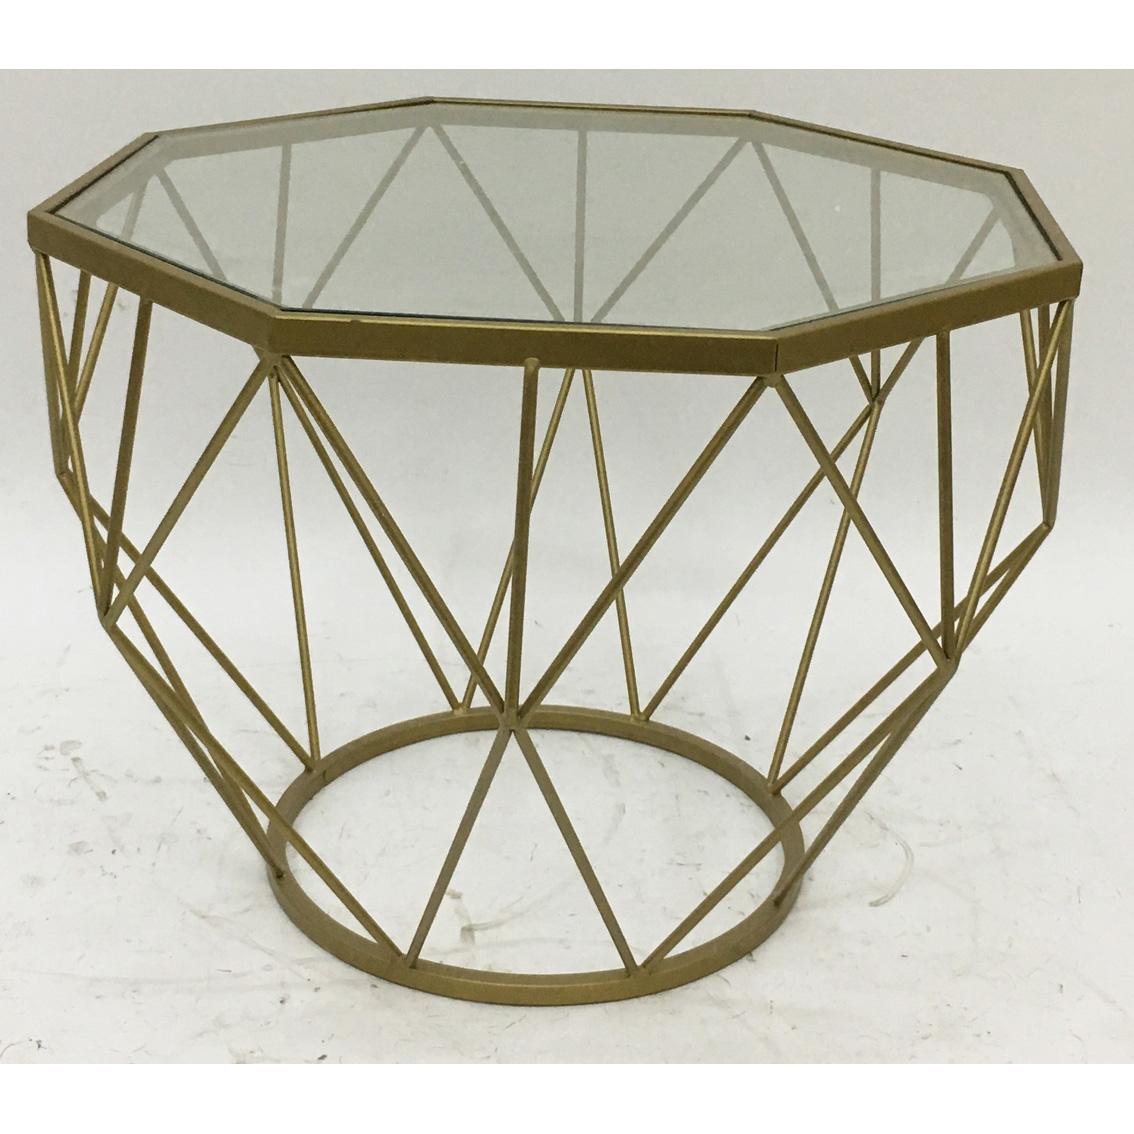 Gold octagonal metal coffee table with clear glass top and X metal side